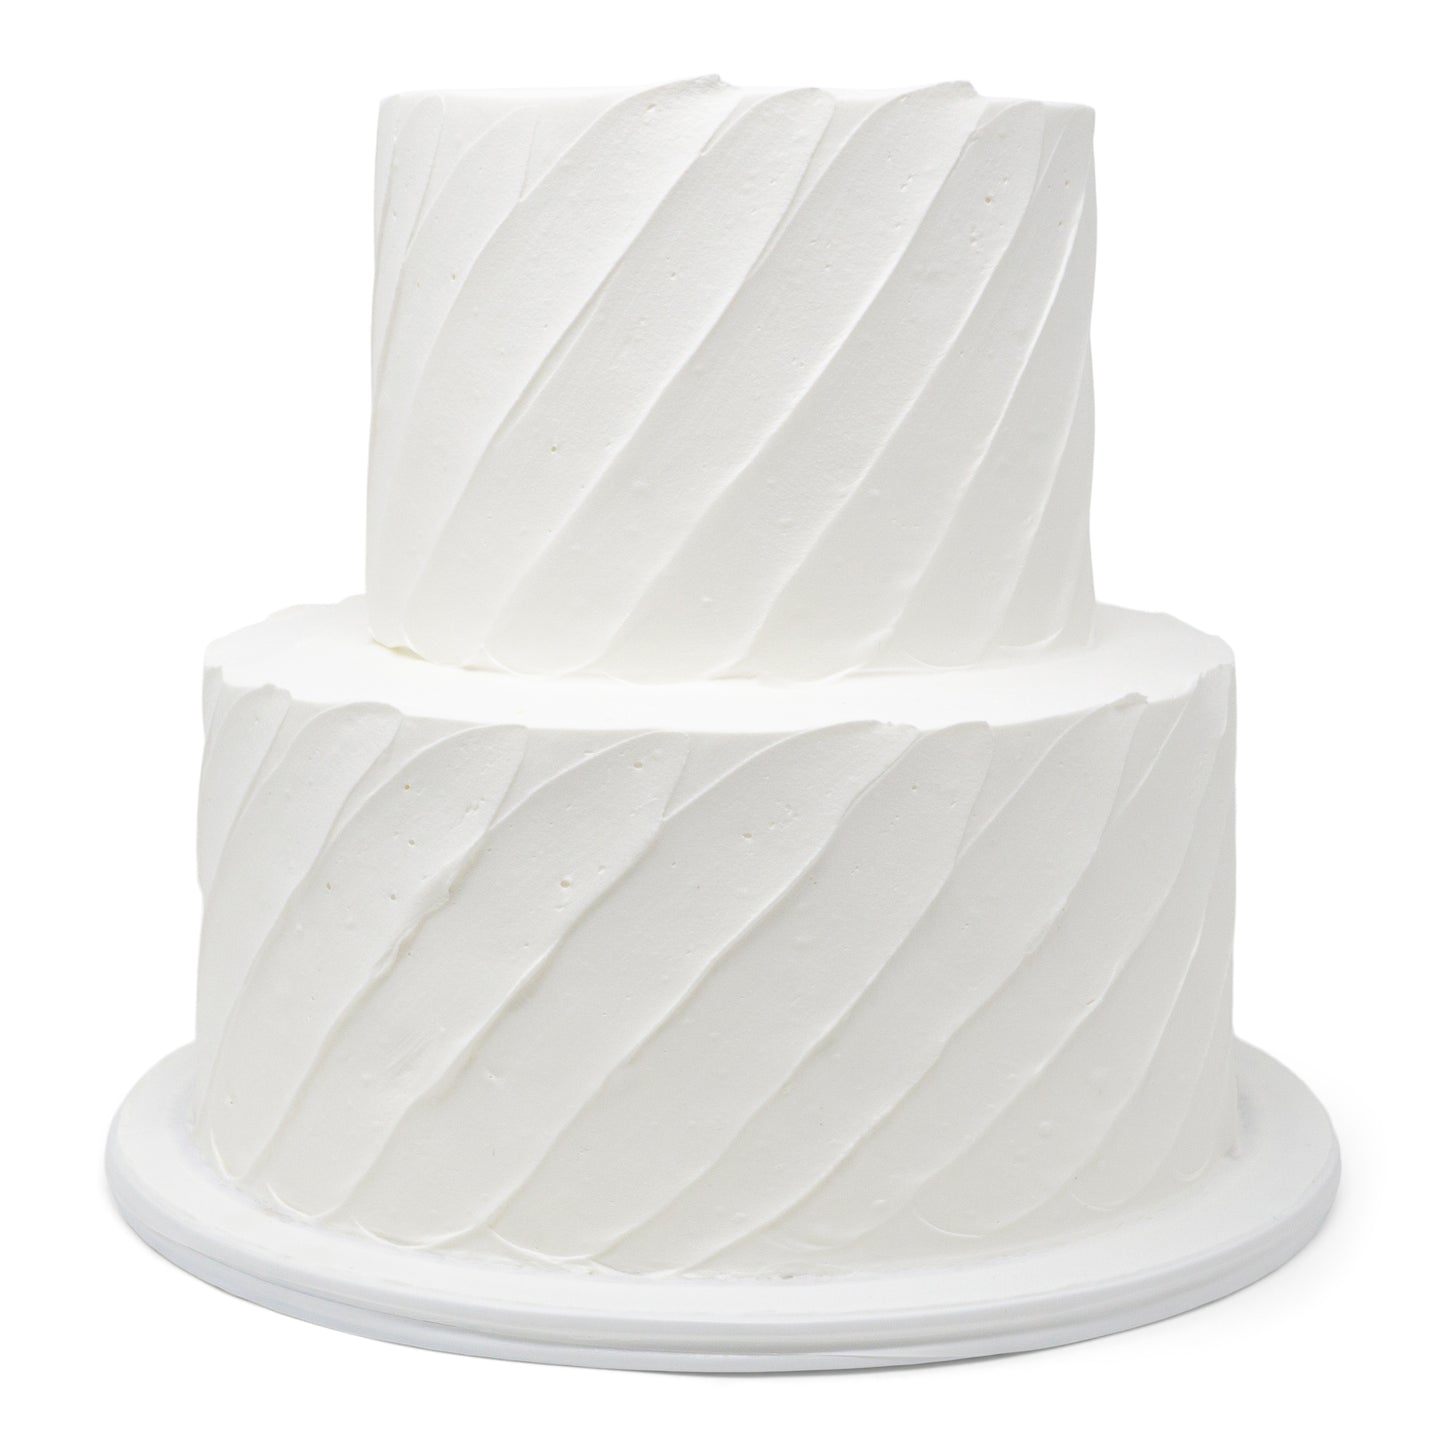 Angled Lines - 2 Tier Gluten-Free Cake